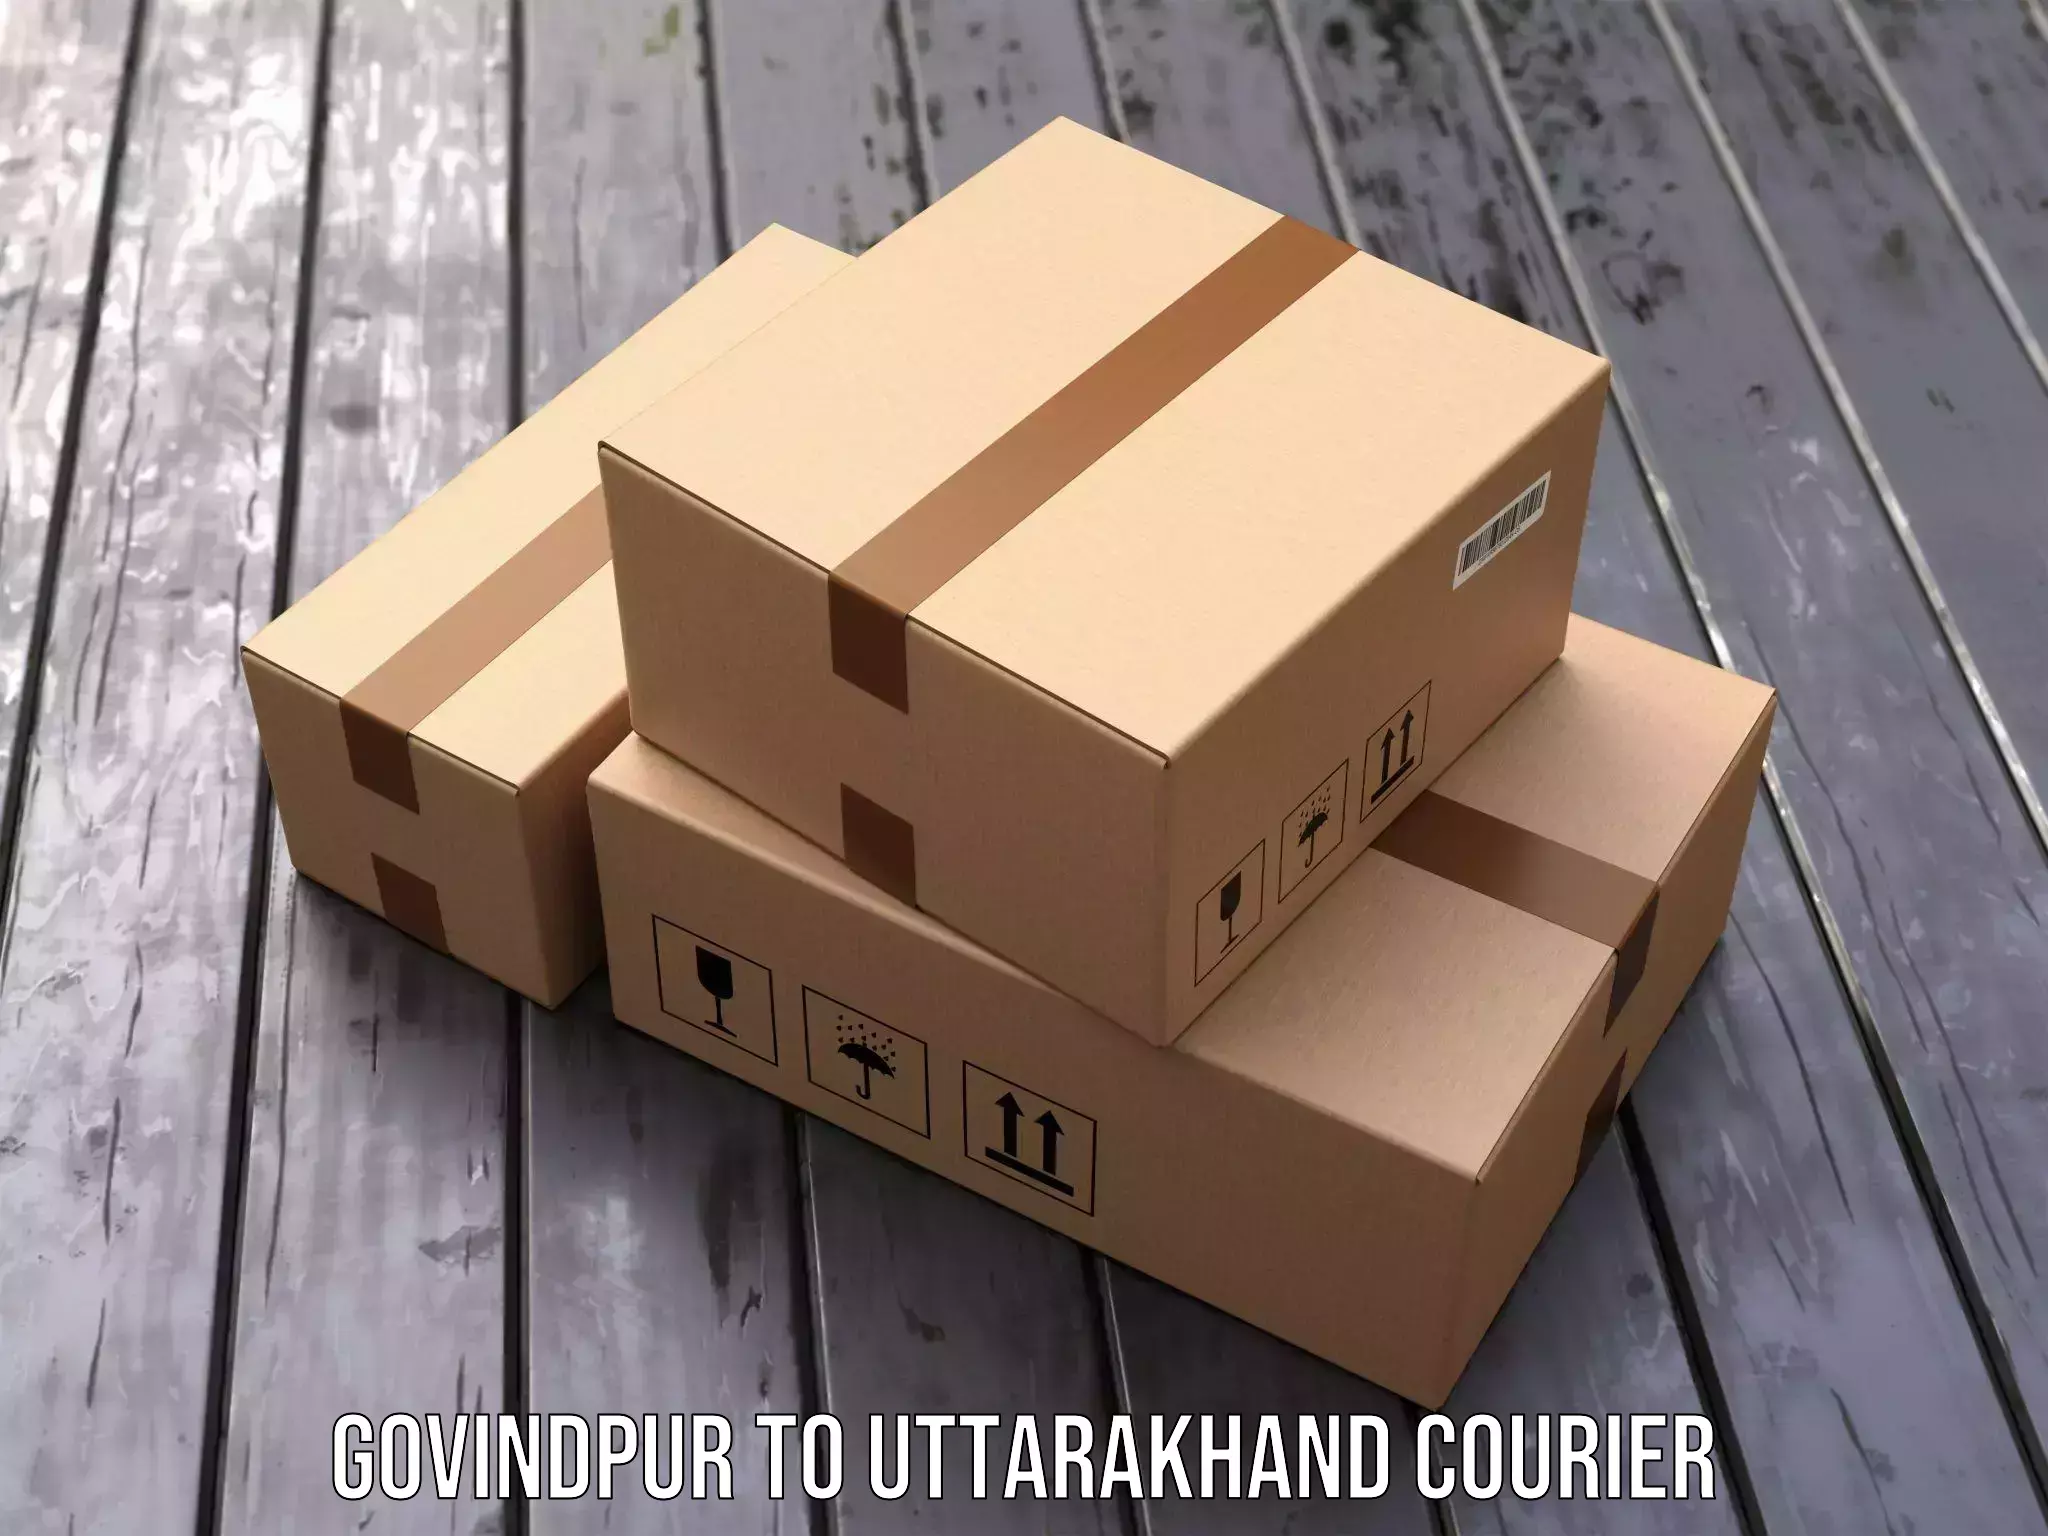 Courier service booking in Govindpur to Pauri